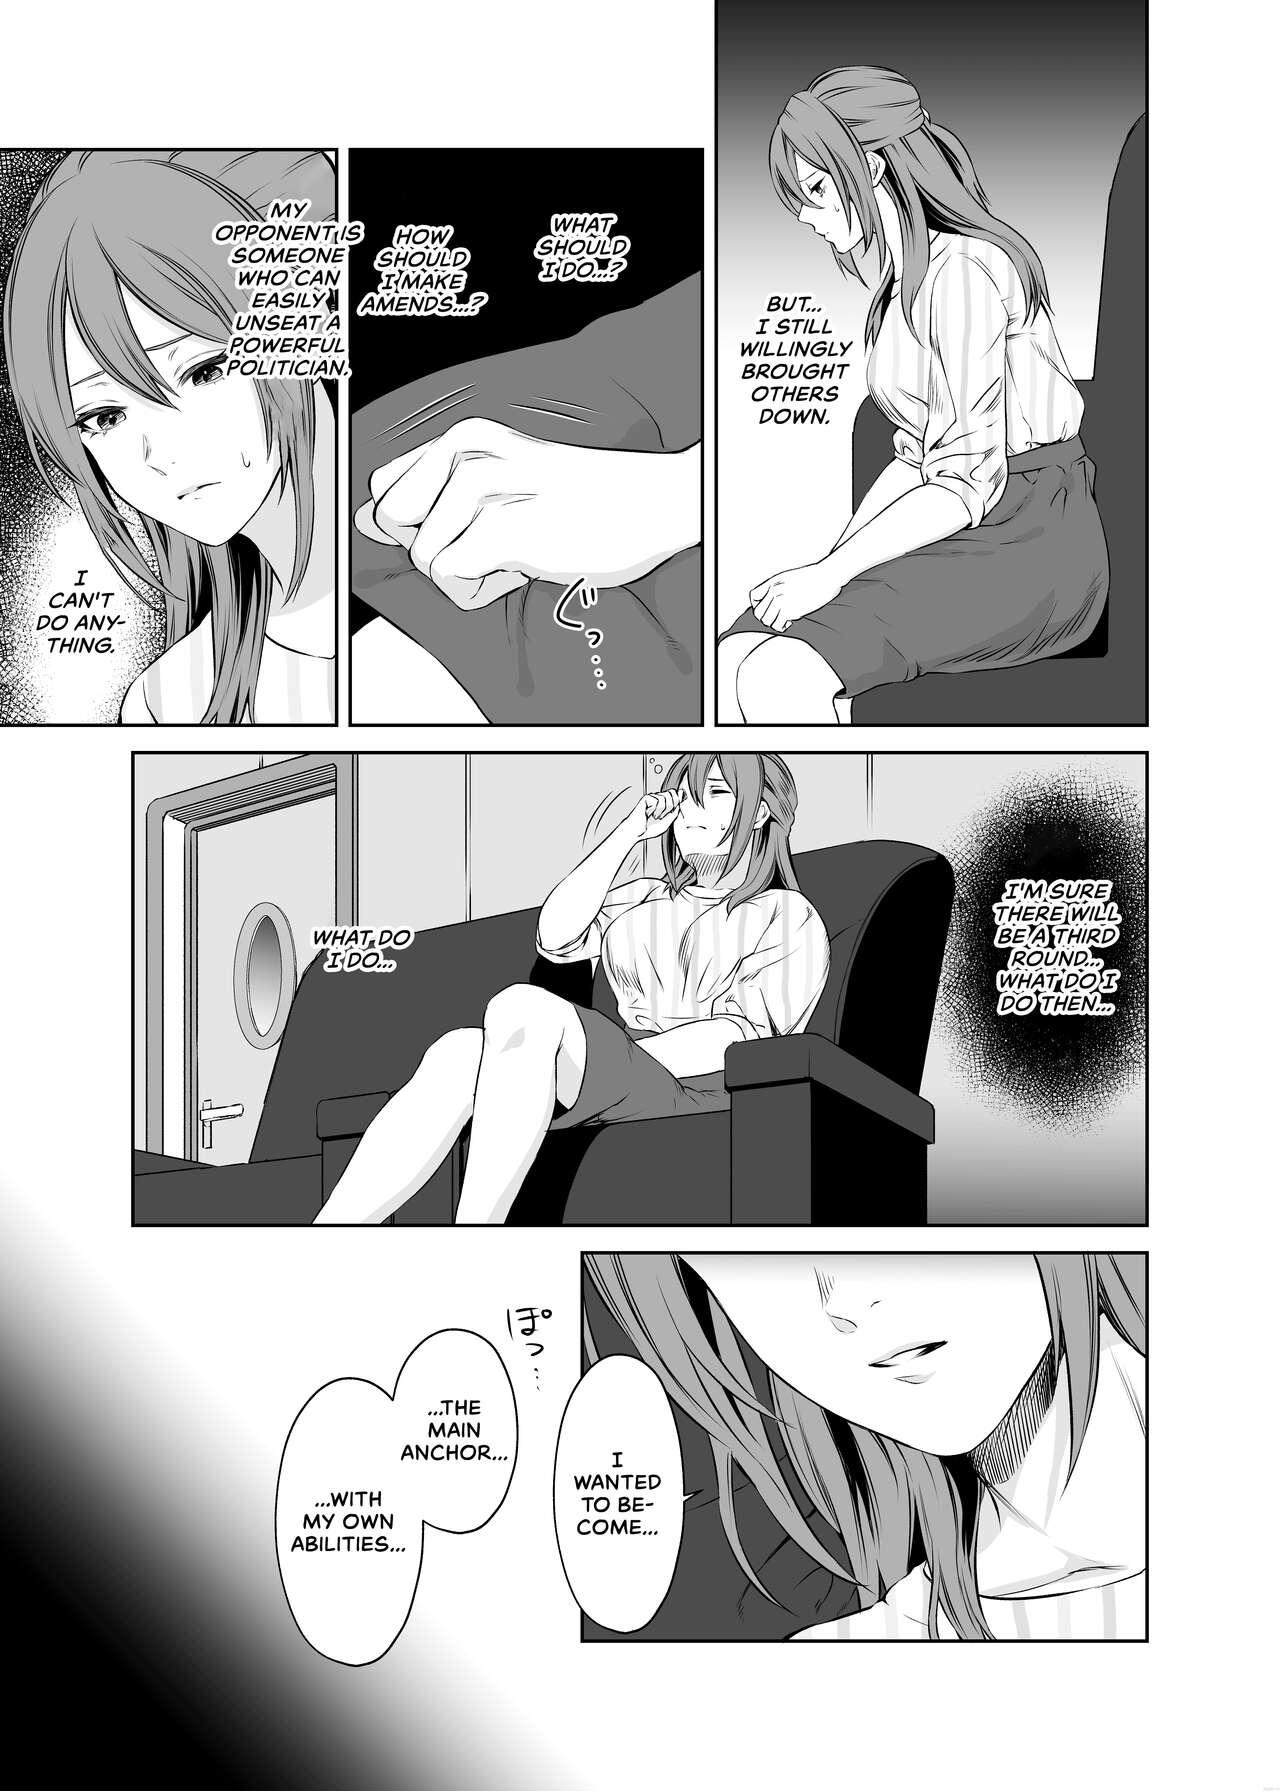 Thot [Remora Works (Meriko)] LesFes Co -Candid Reporting- Vol. 003 [English] - Original Amateur - Page 6